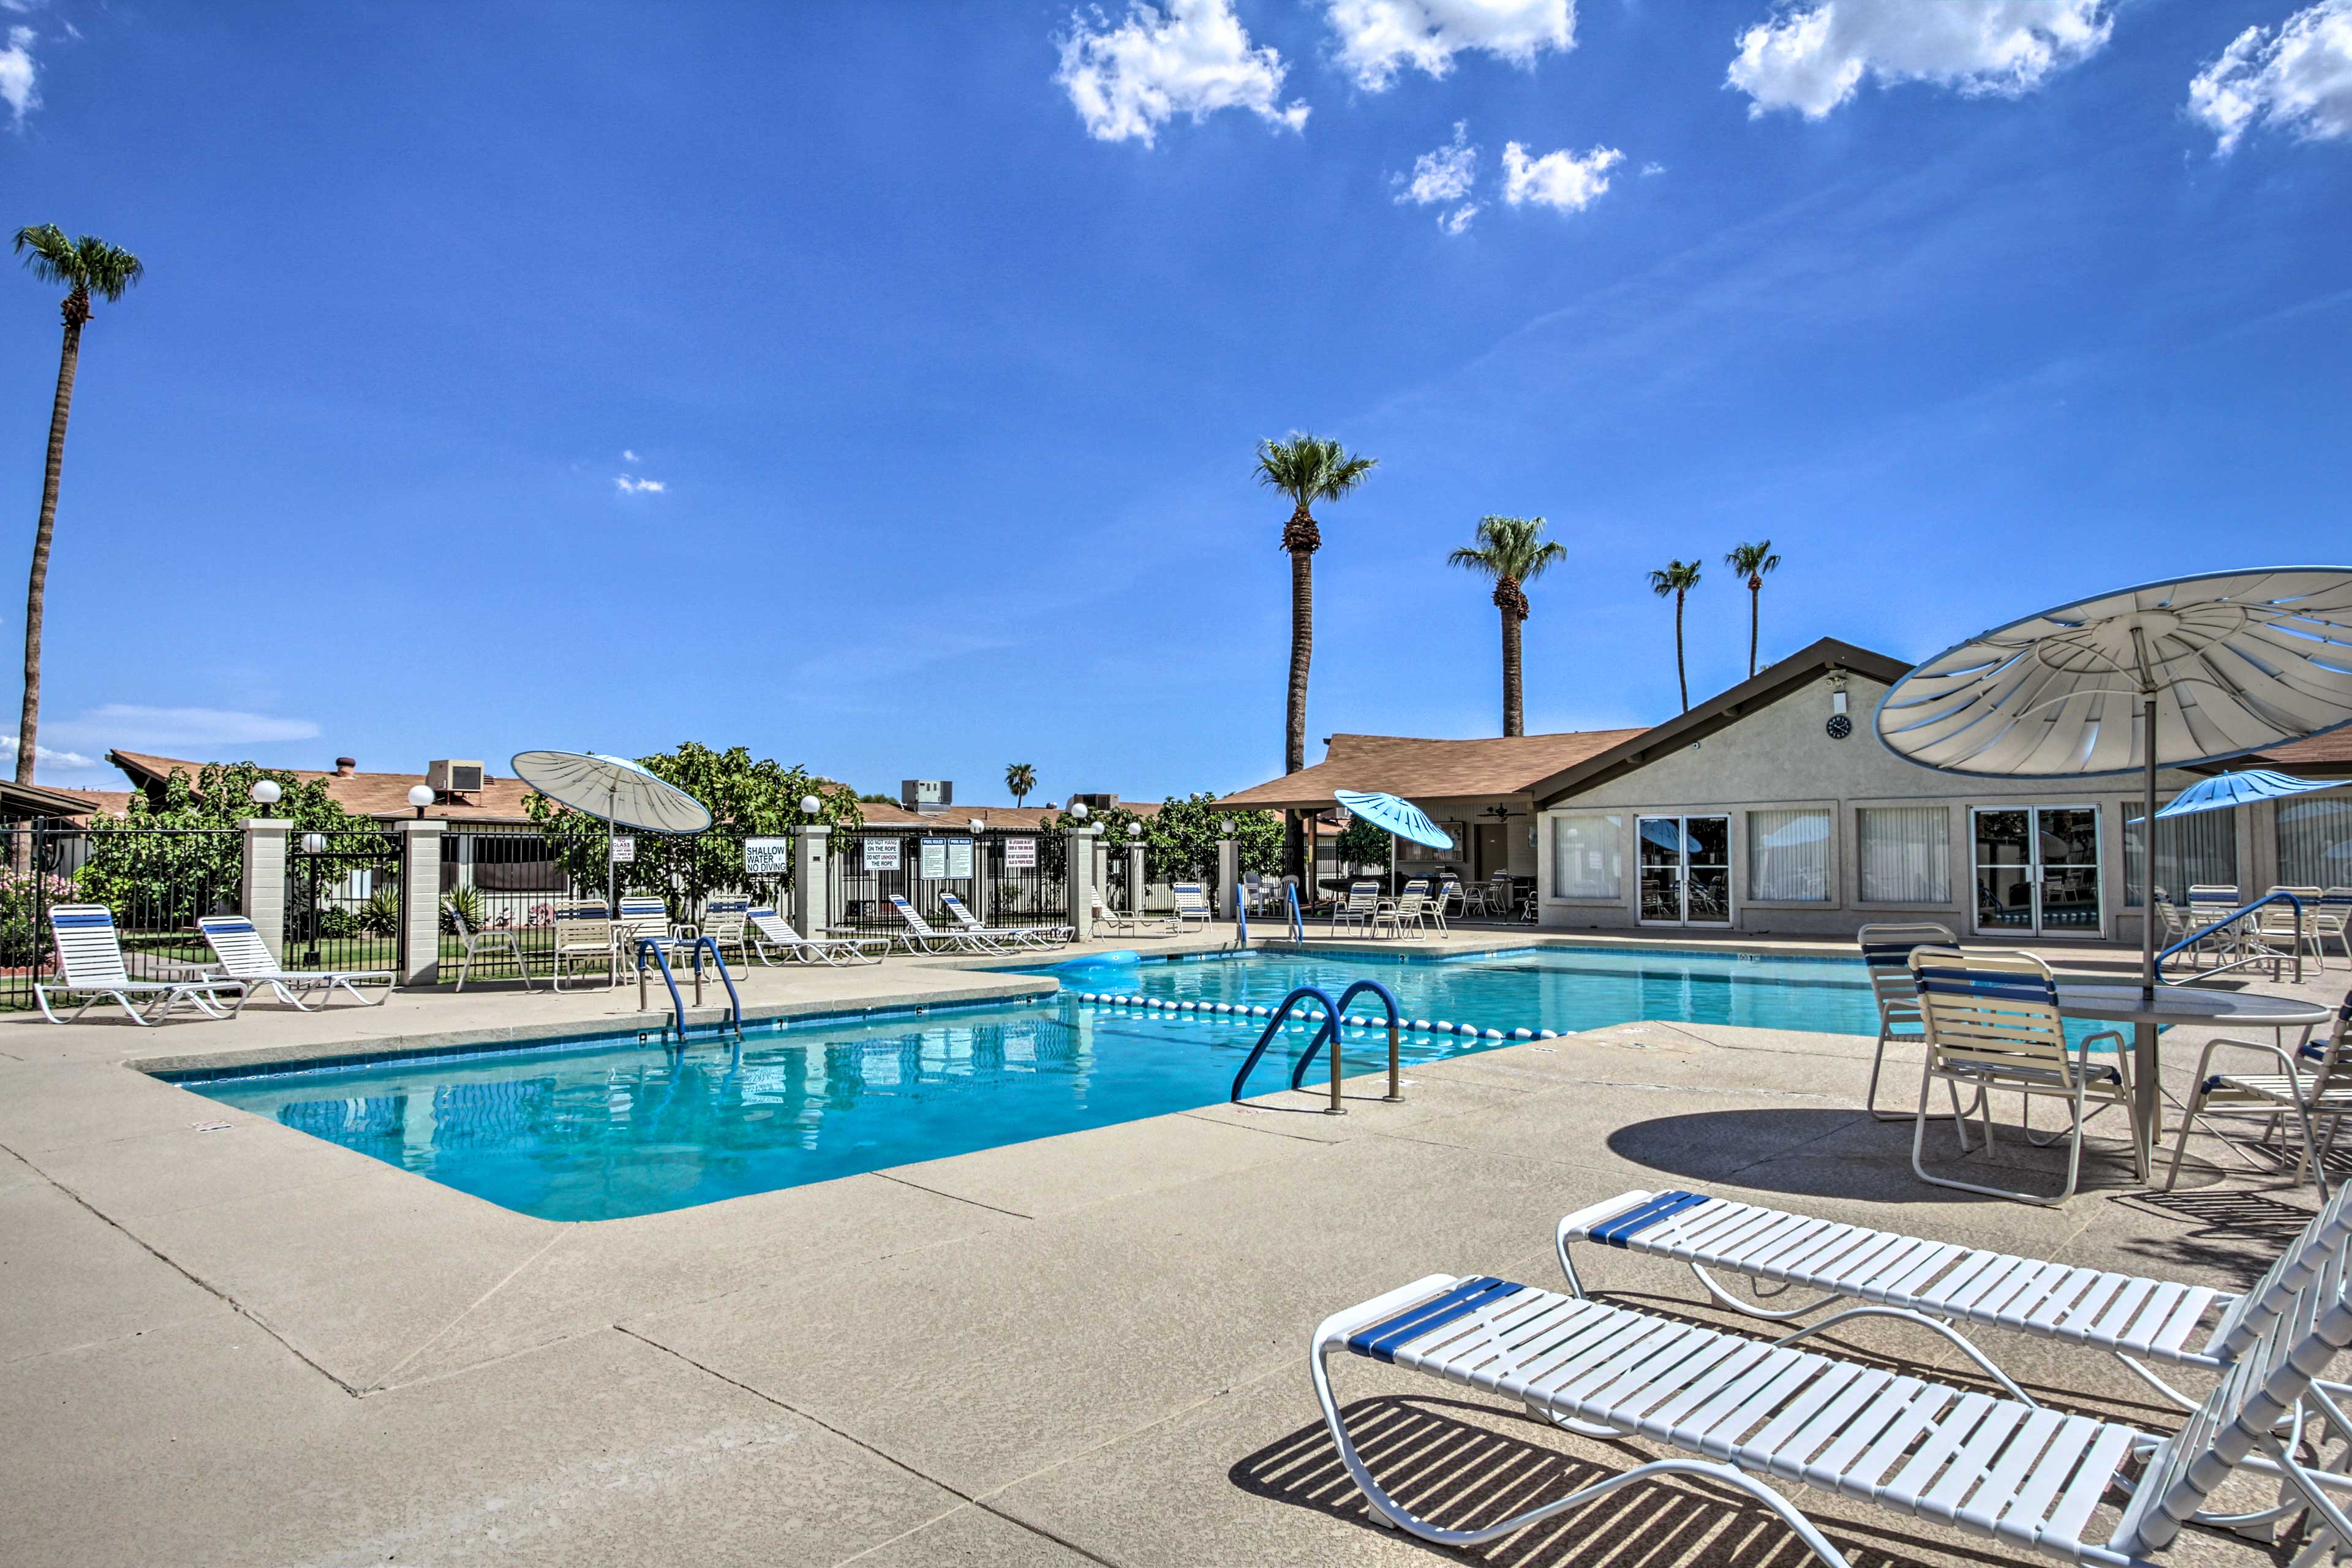 Scottsdale Vacation Rental | 2BR | 1BA | Step-Free Access | 981 Sq Ft